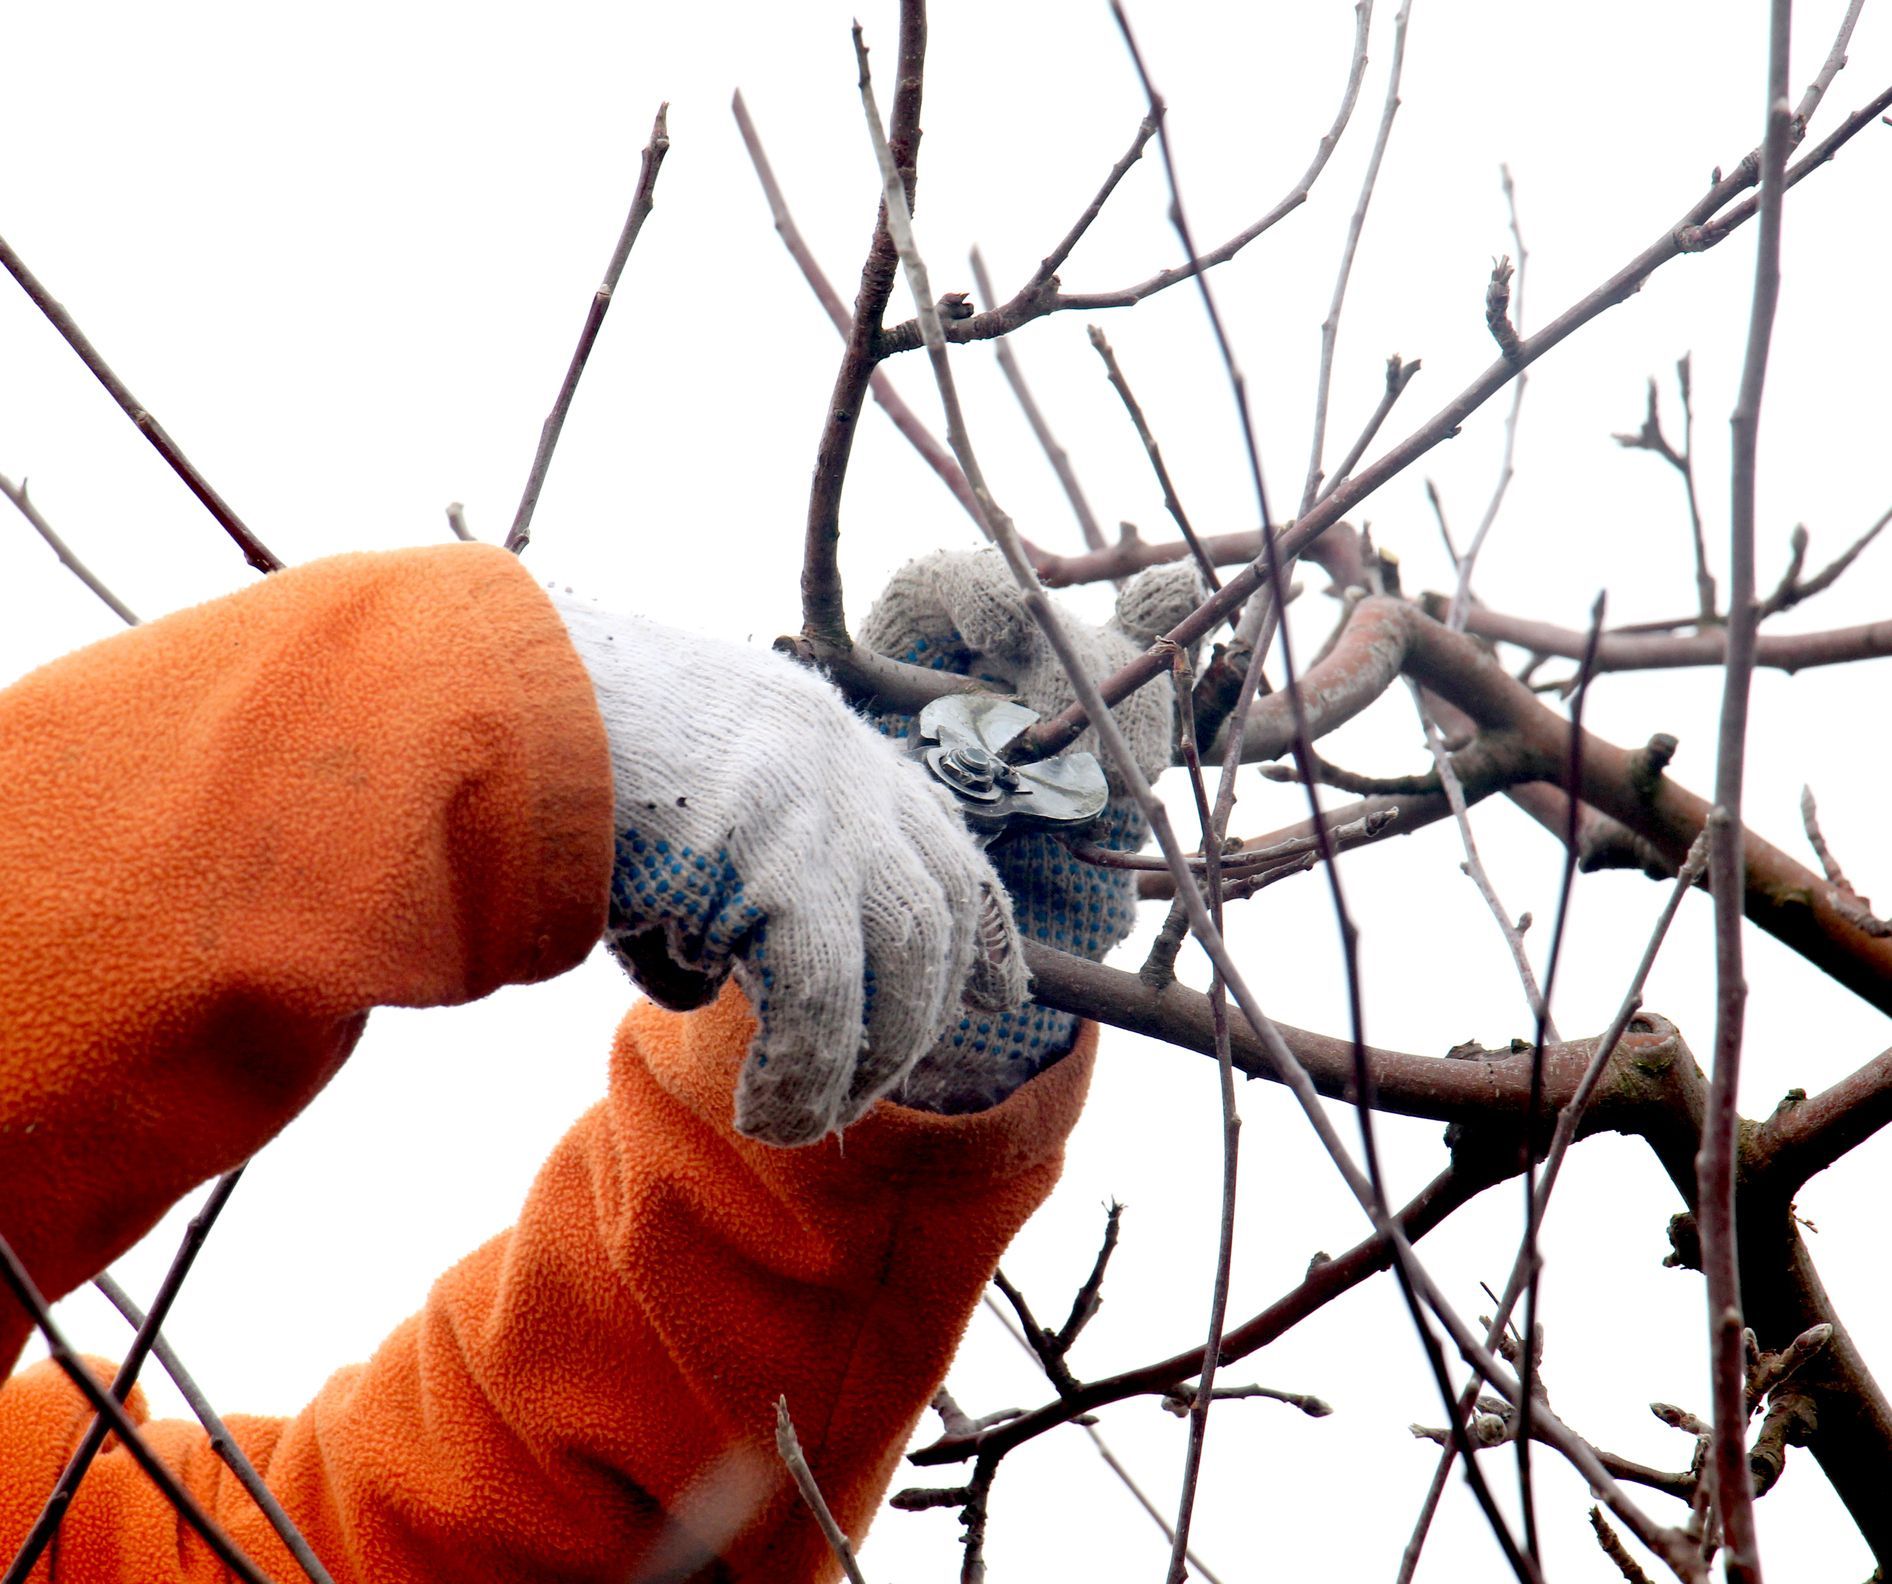 Pruning an Apple tree in the winter